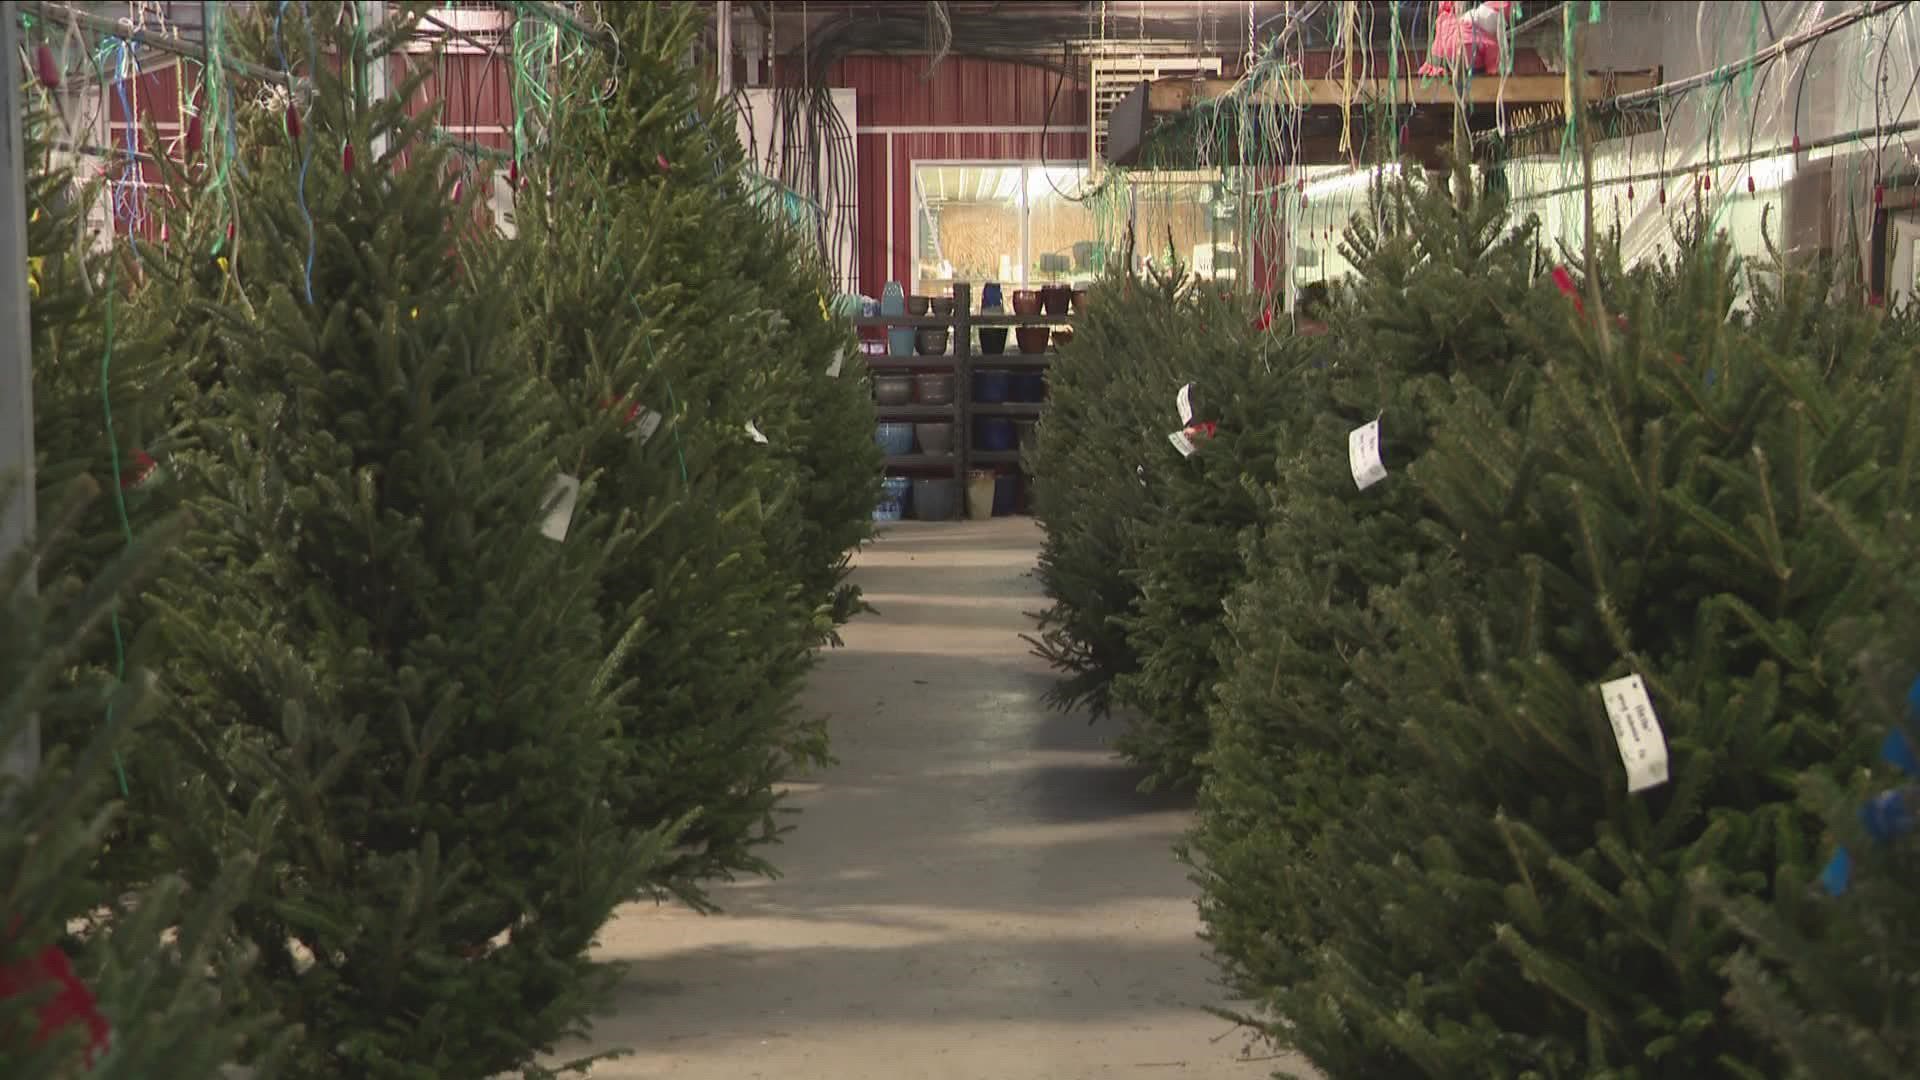 Experts advise shoppers to by smaller and earlier to cut costs this holiday season.